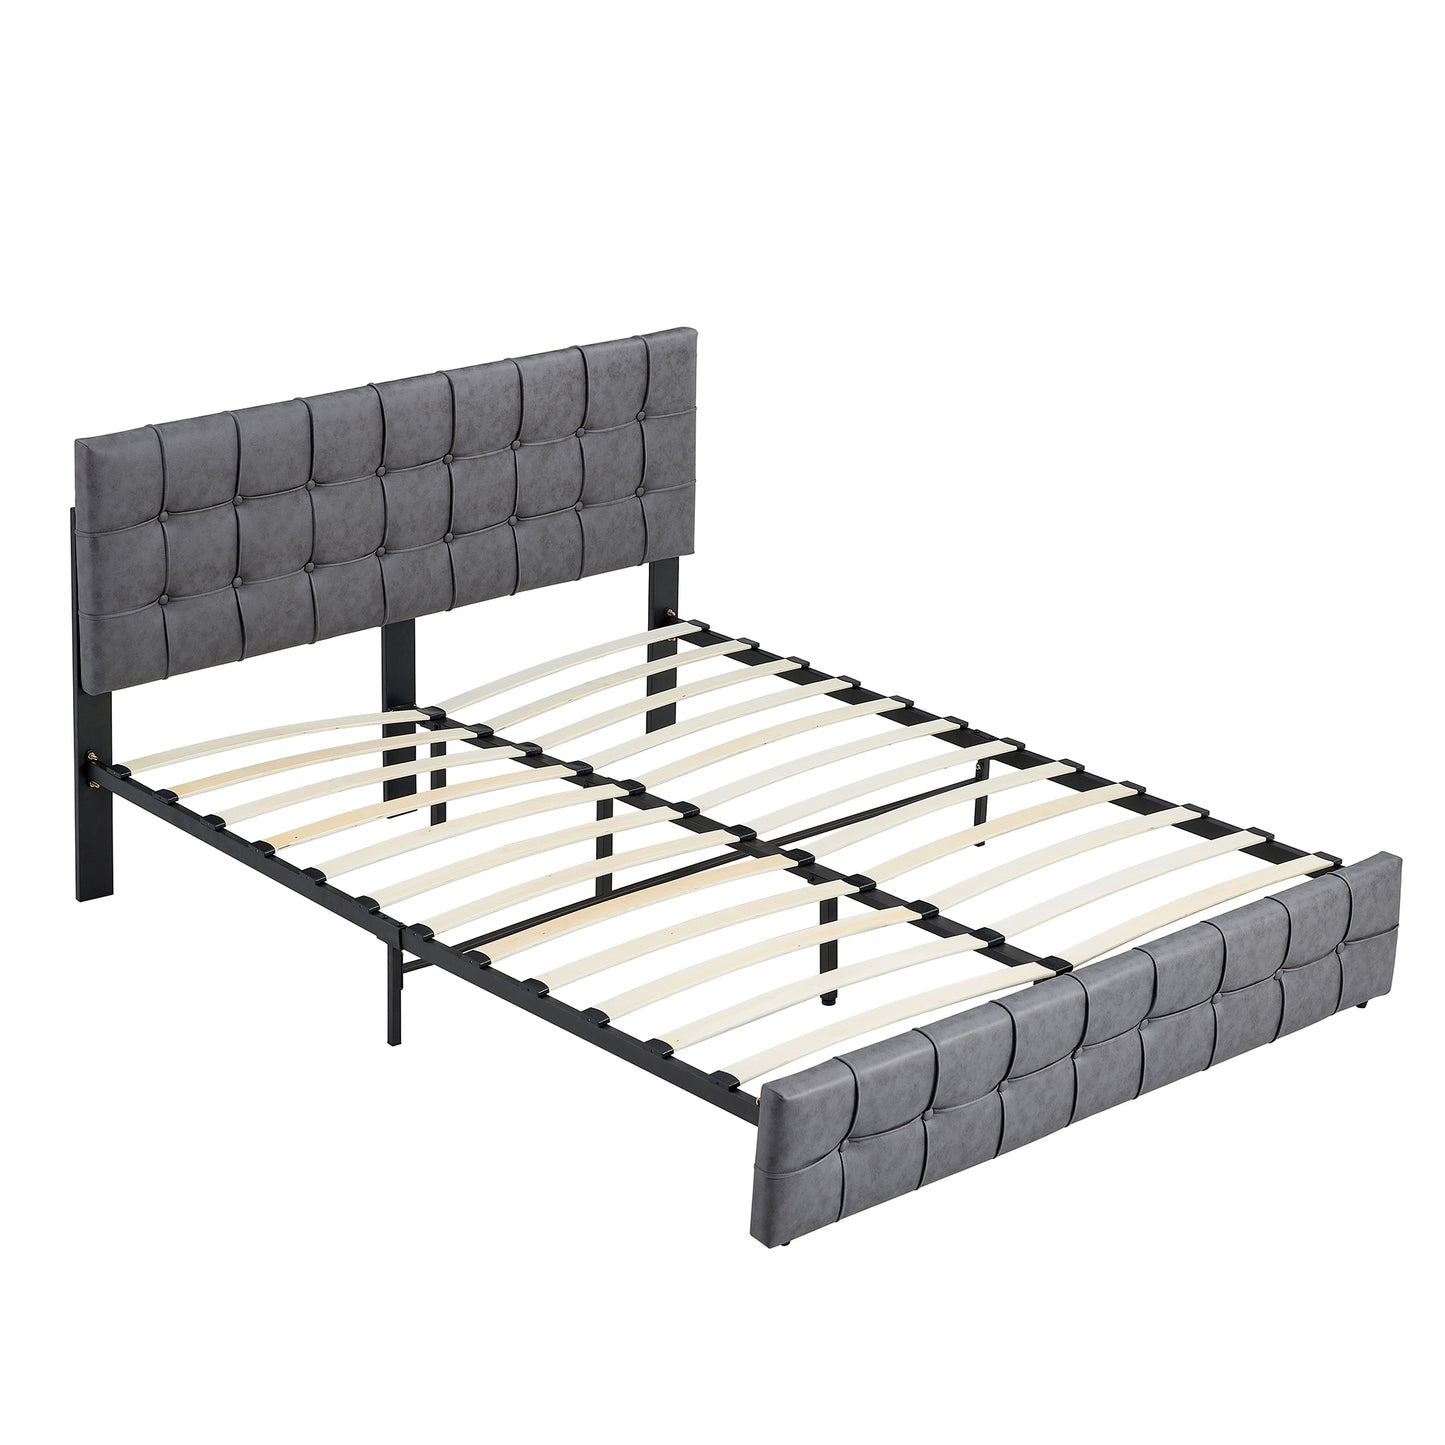 SYNGAR Upholstered King Size Fabric Platform Bed Frame with Button Tufted Headboard, Load-Bearing 650LBS, Gray